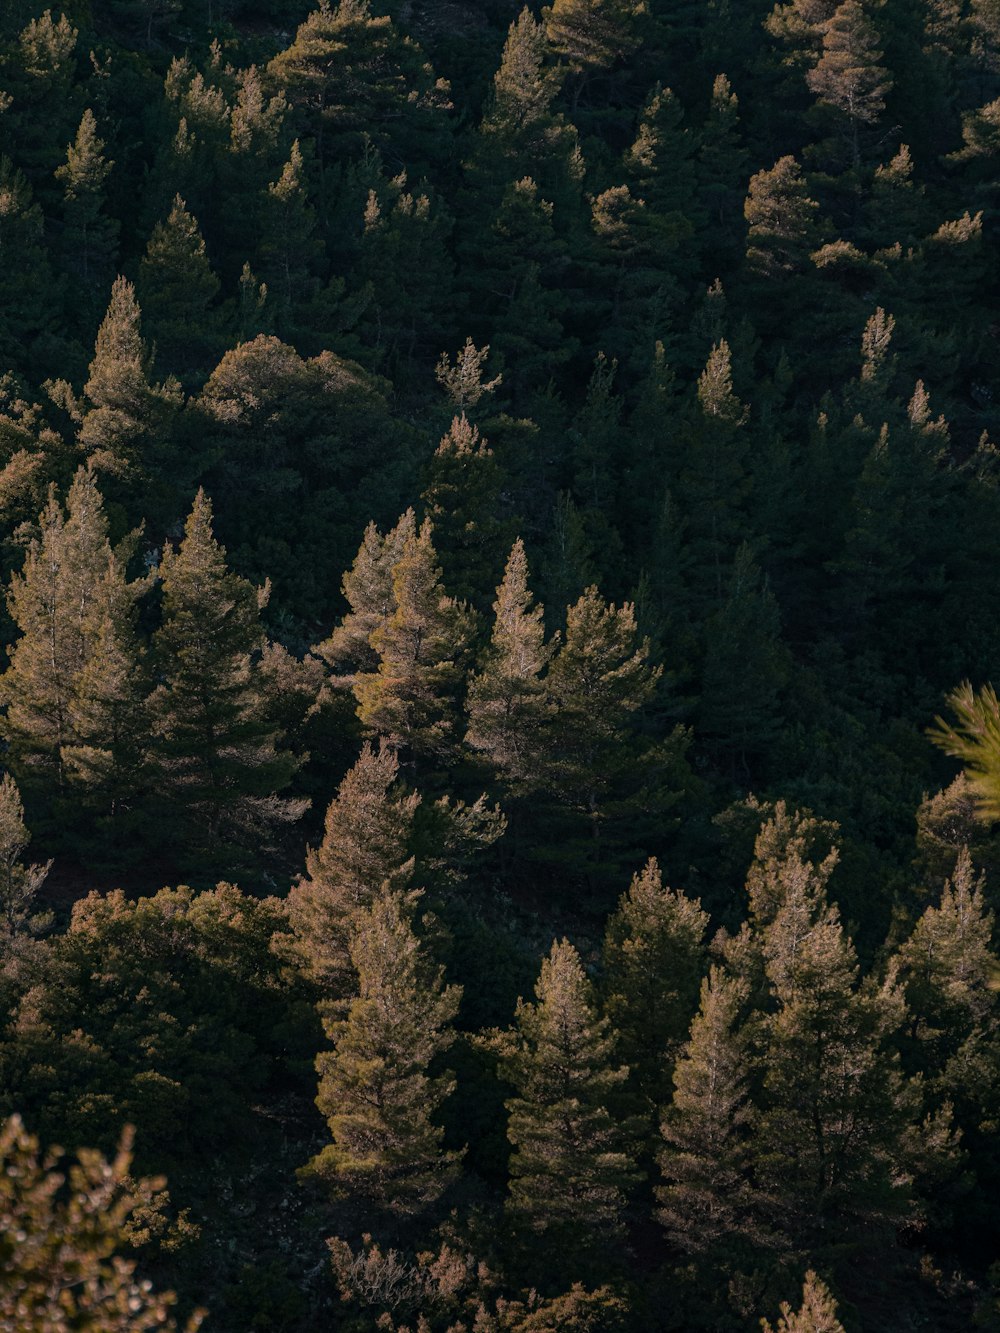 a plane flying over a forest filled with lots of trees